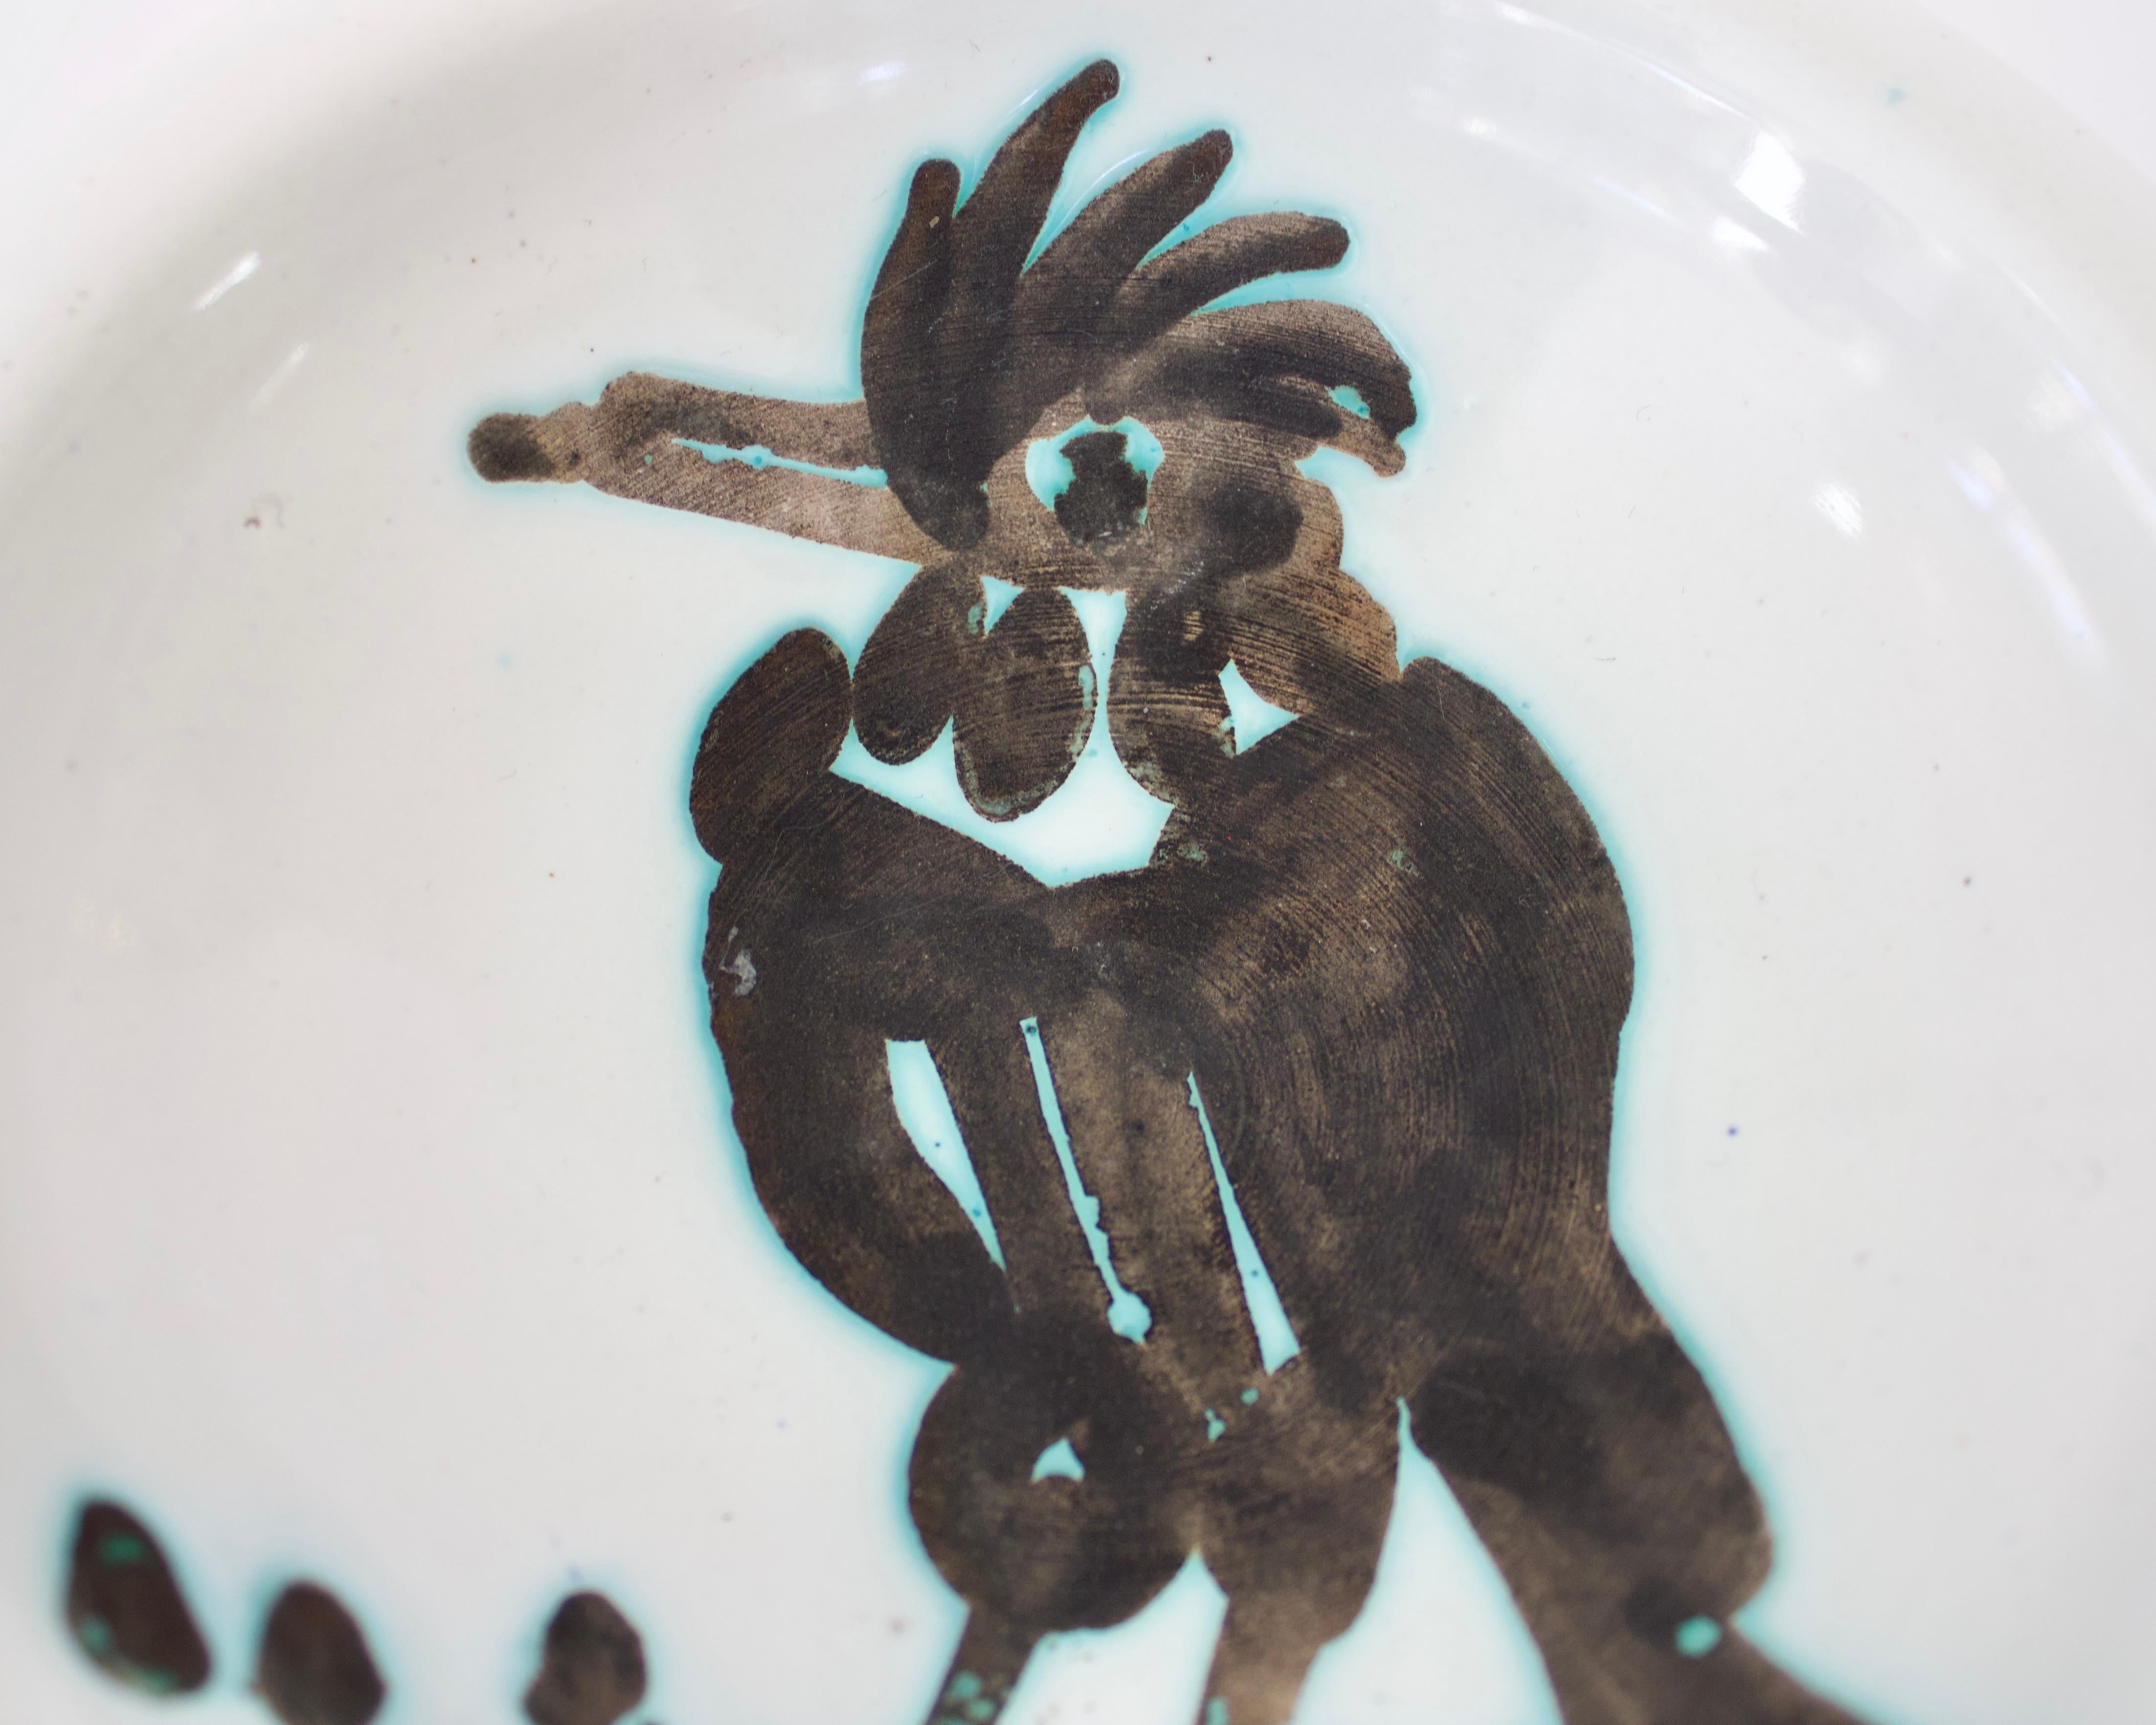 French Pablo Picasso Ceramic Dish Editions Picasso Madoura Bird with Tuft, circa 1952 For Sale